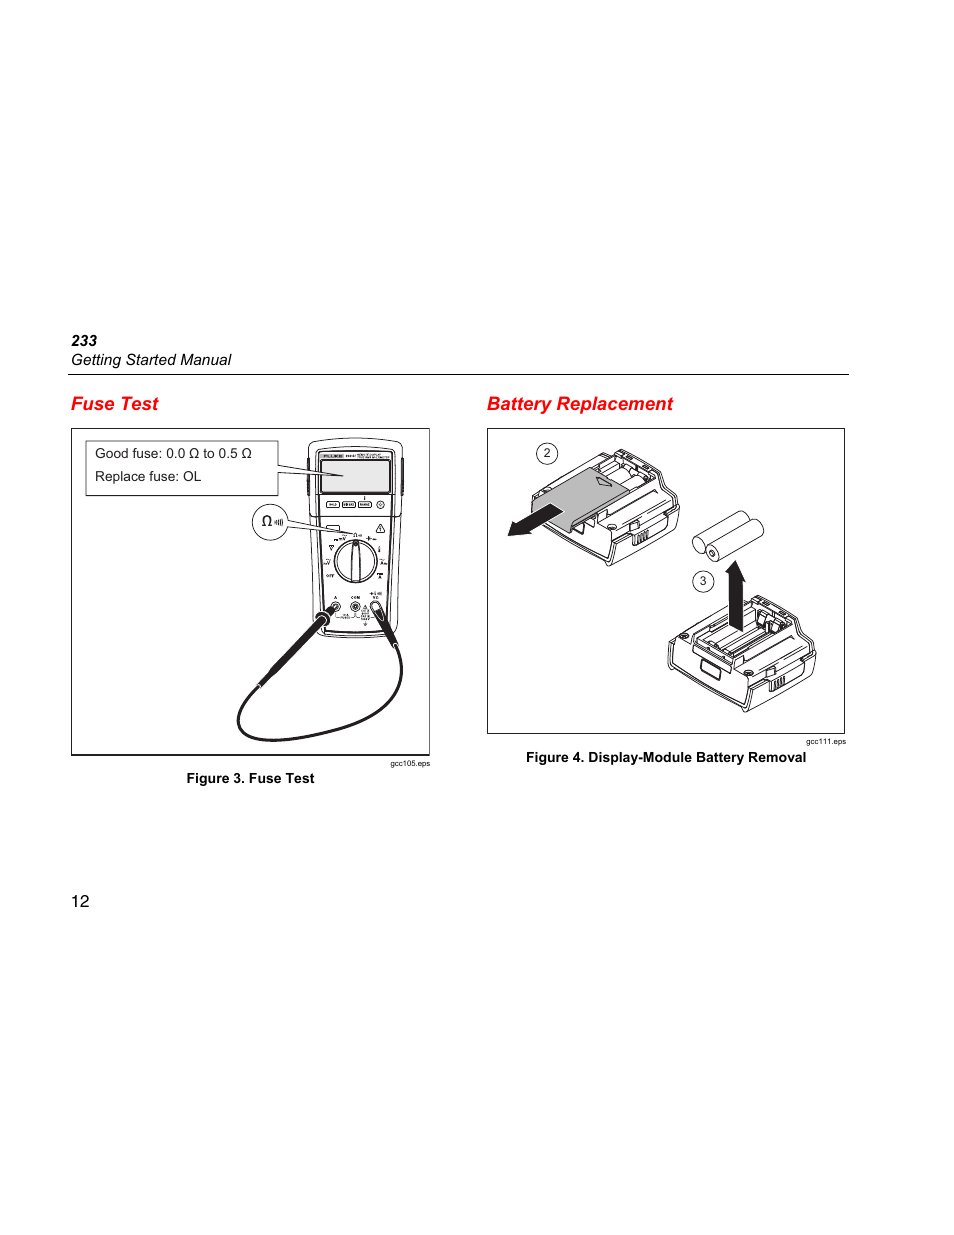 Fuse test, Battery replacement | Fluke 233 User Manual | Page 14 / 16